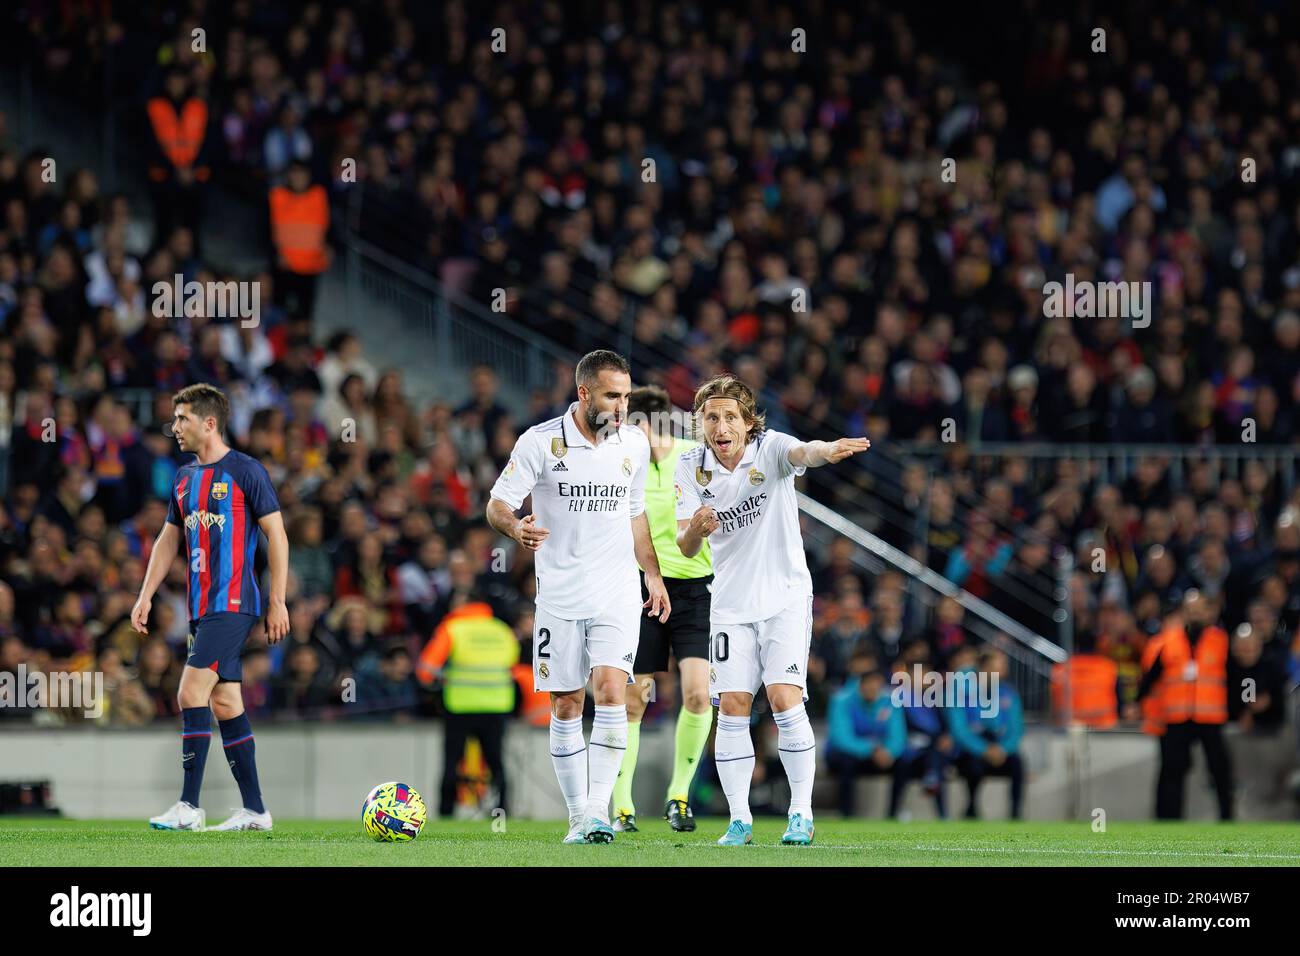 BARCELONA - MAR 19: Carvajal (L) and Modric (R) talk during the LaLiga match between FC Barcelona and Real Madrid at the Spotify Camp Nou Stadium on M Stock Photo